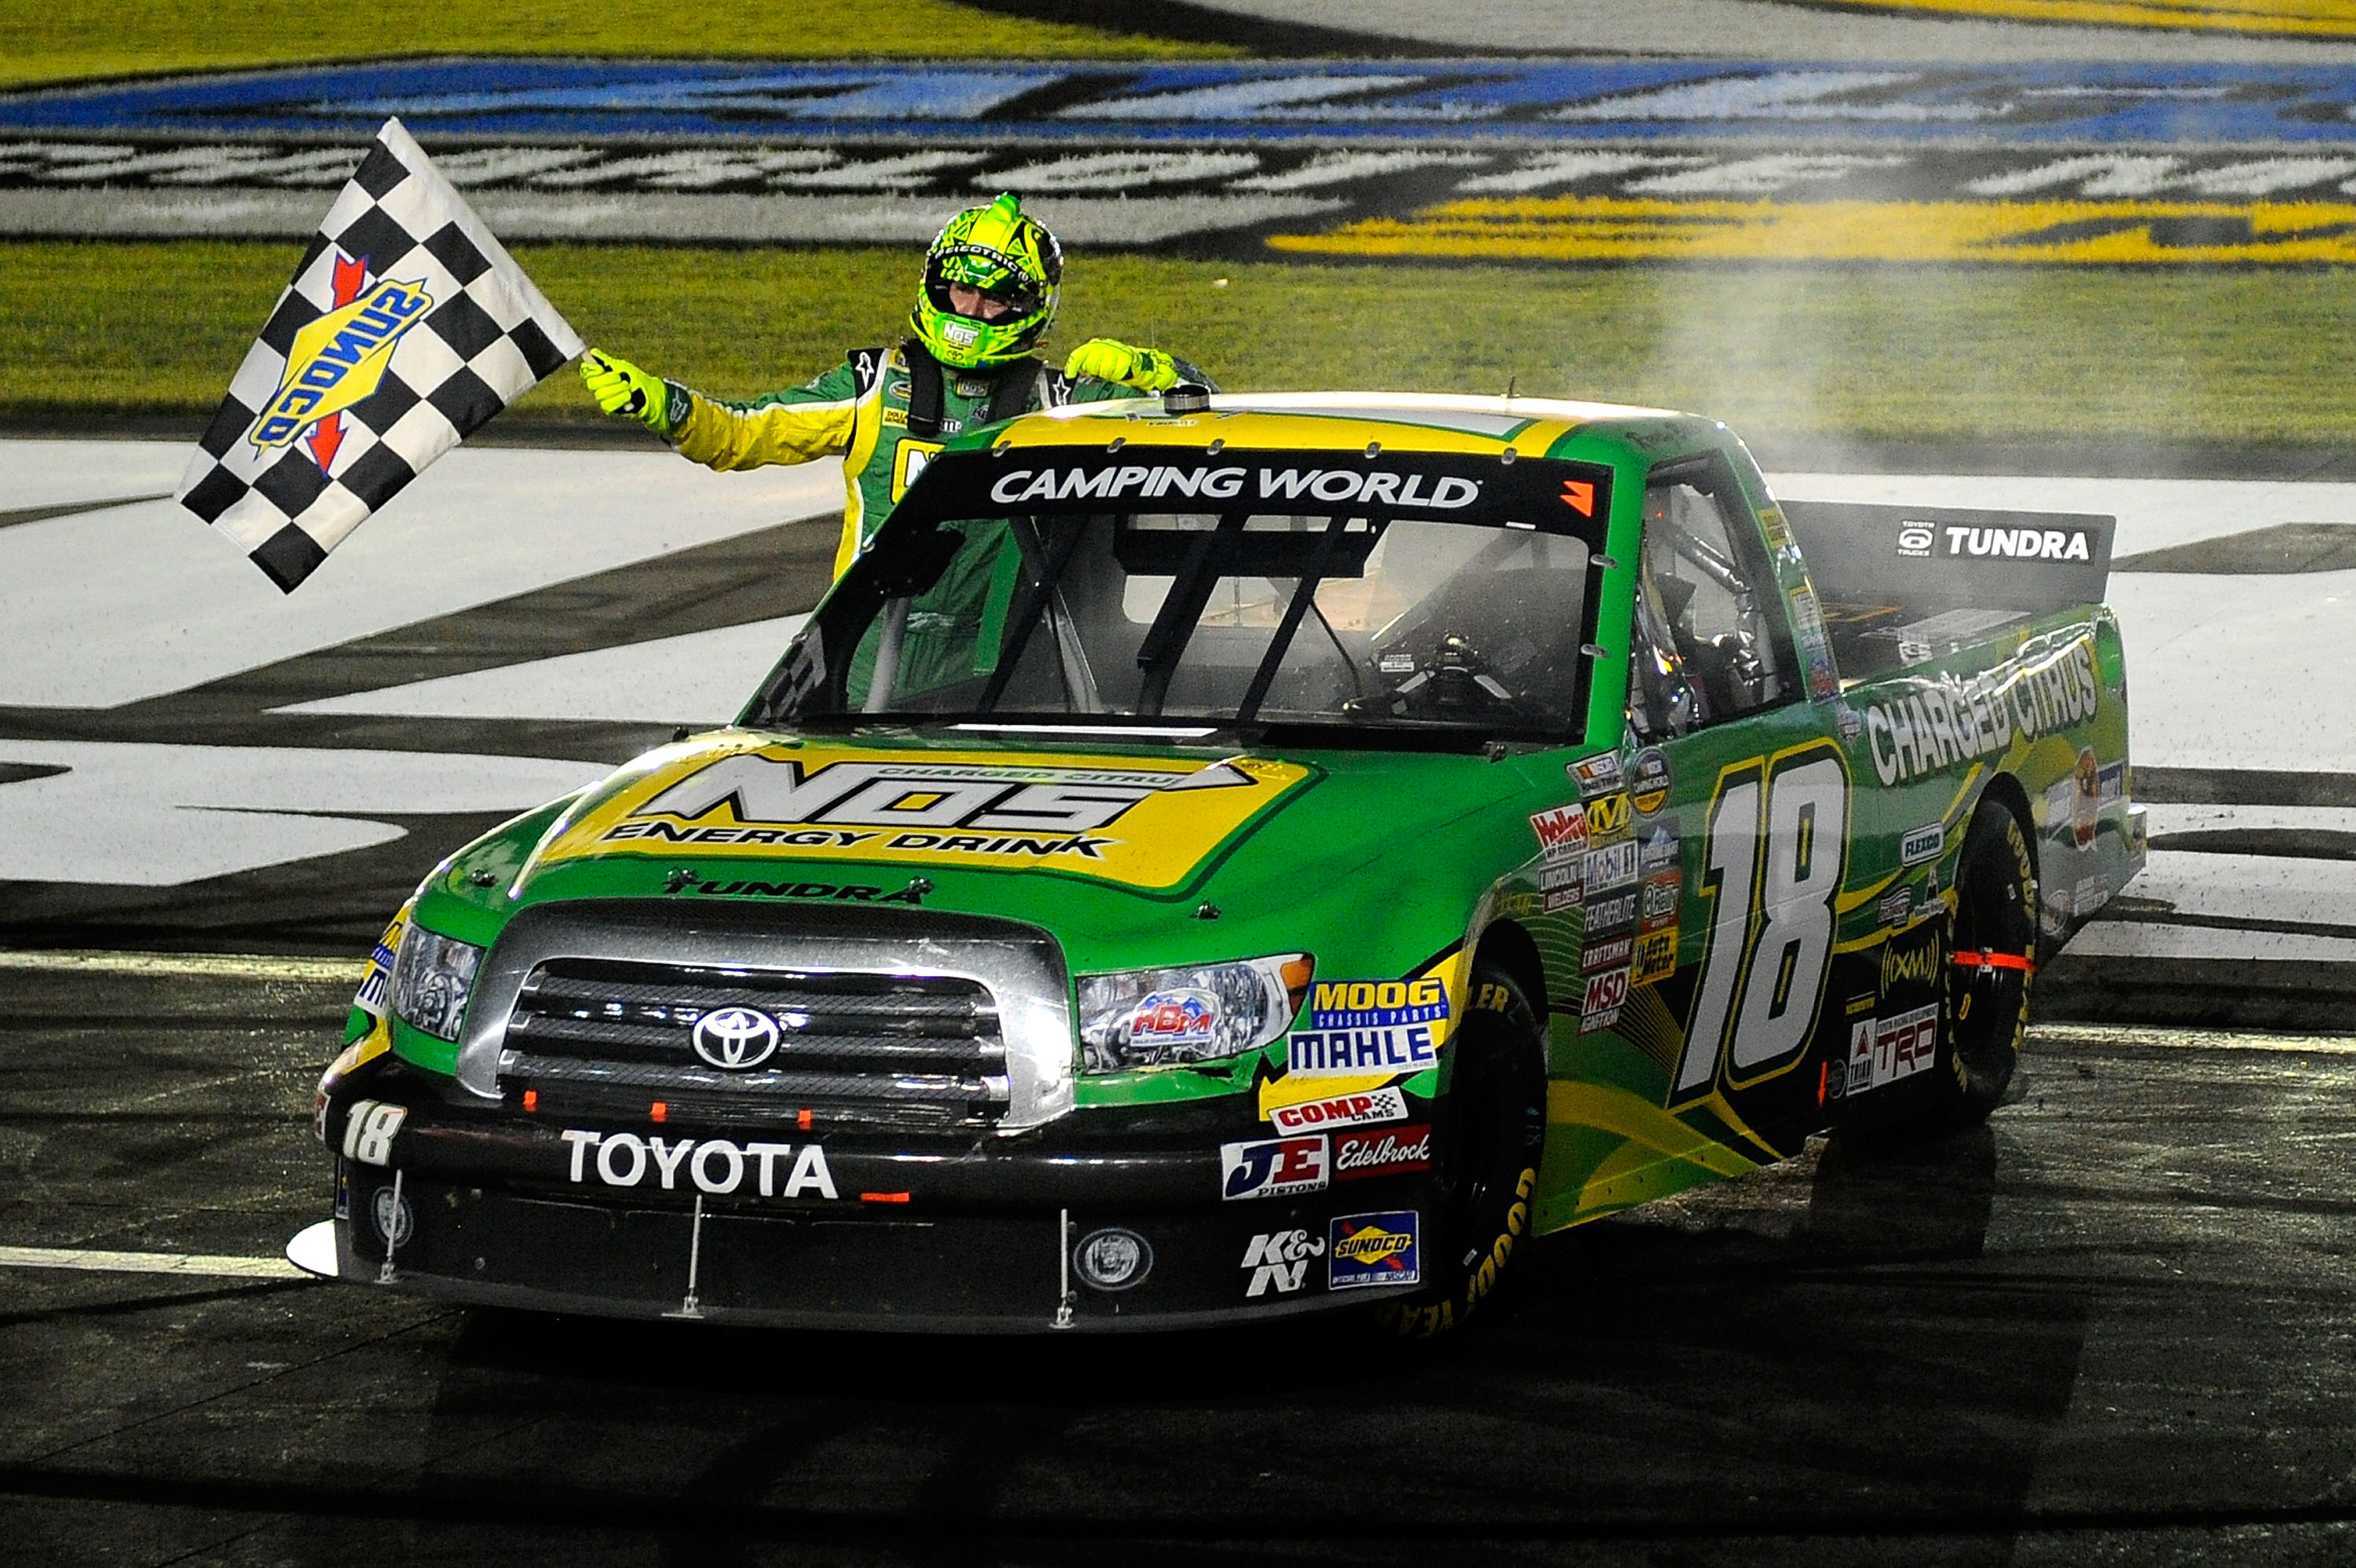 CHARLOTTE, NC - MAY 20:  Kyle Busch, driver of the #18 NOS Energy Drink Toyota, celebrates with the checkered flag after winning the NASCAR Camping World Truck Series North Carolina Education Lottery 200 at Charlotte Motor Speedway on May 20, 2011 in Char